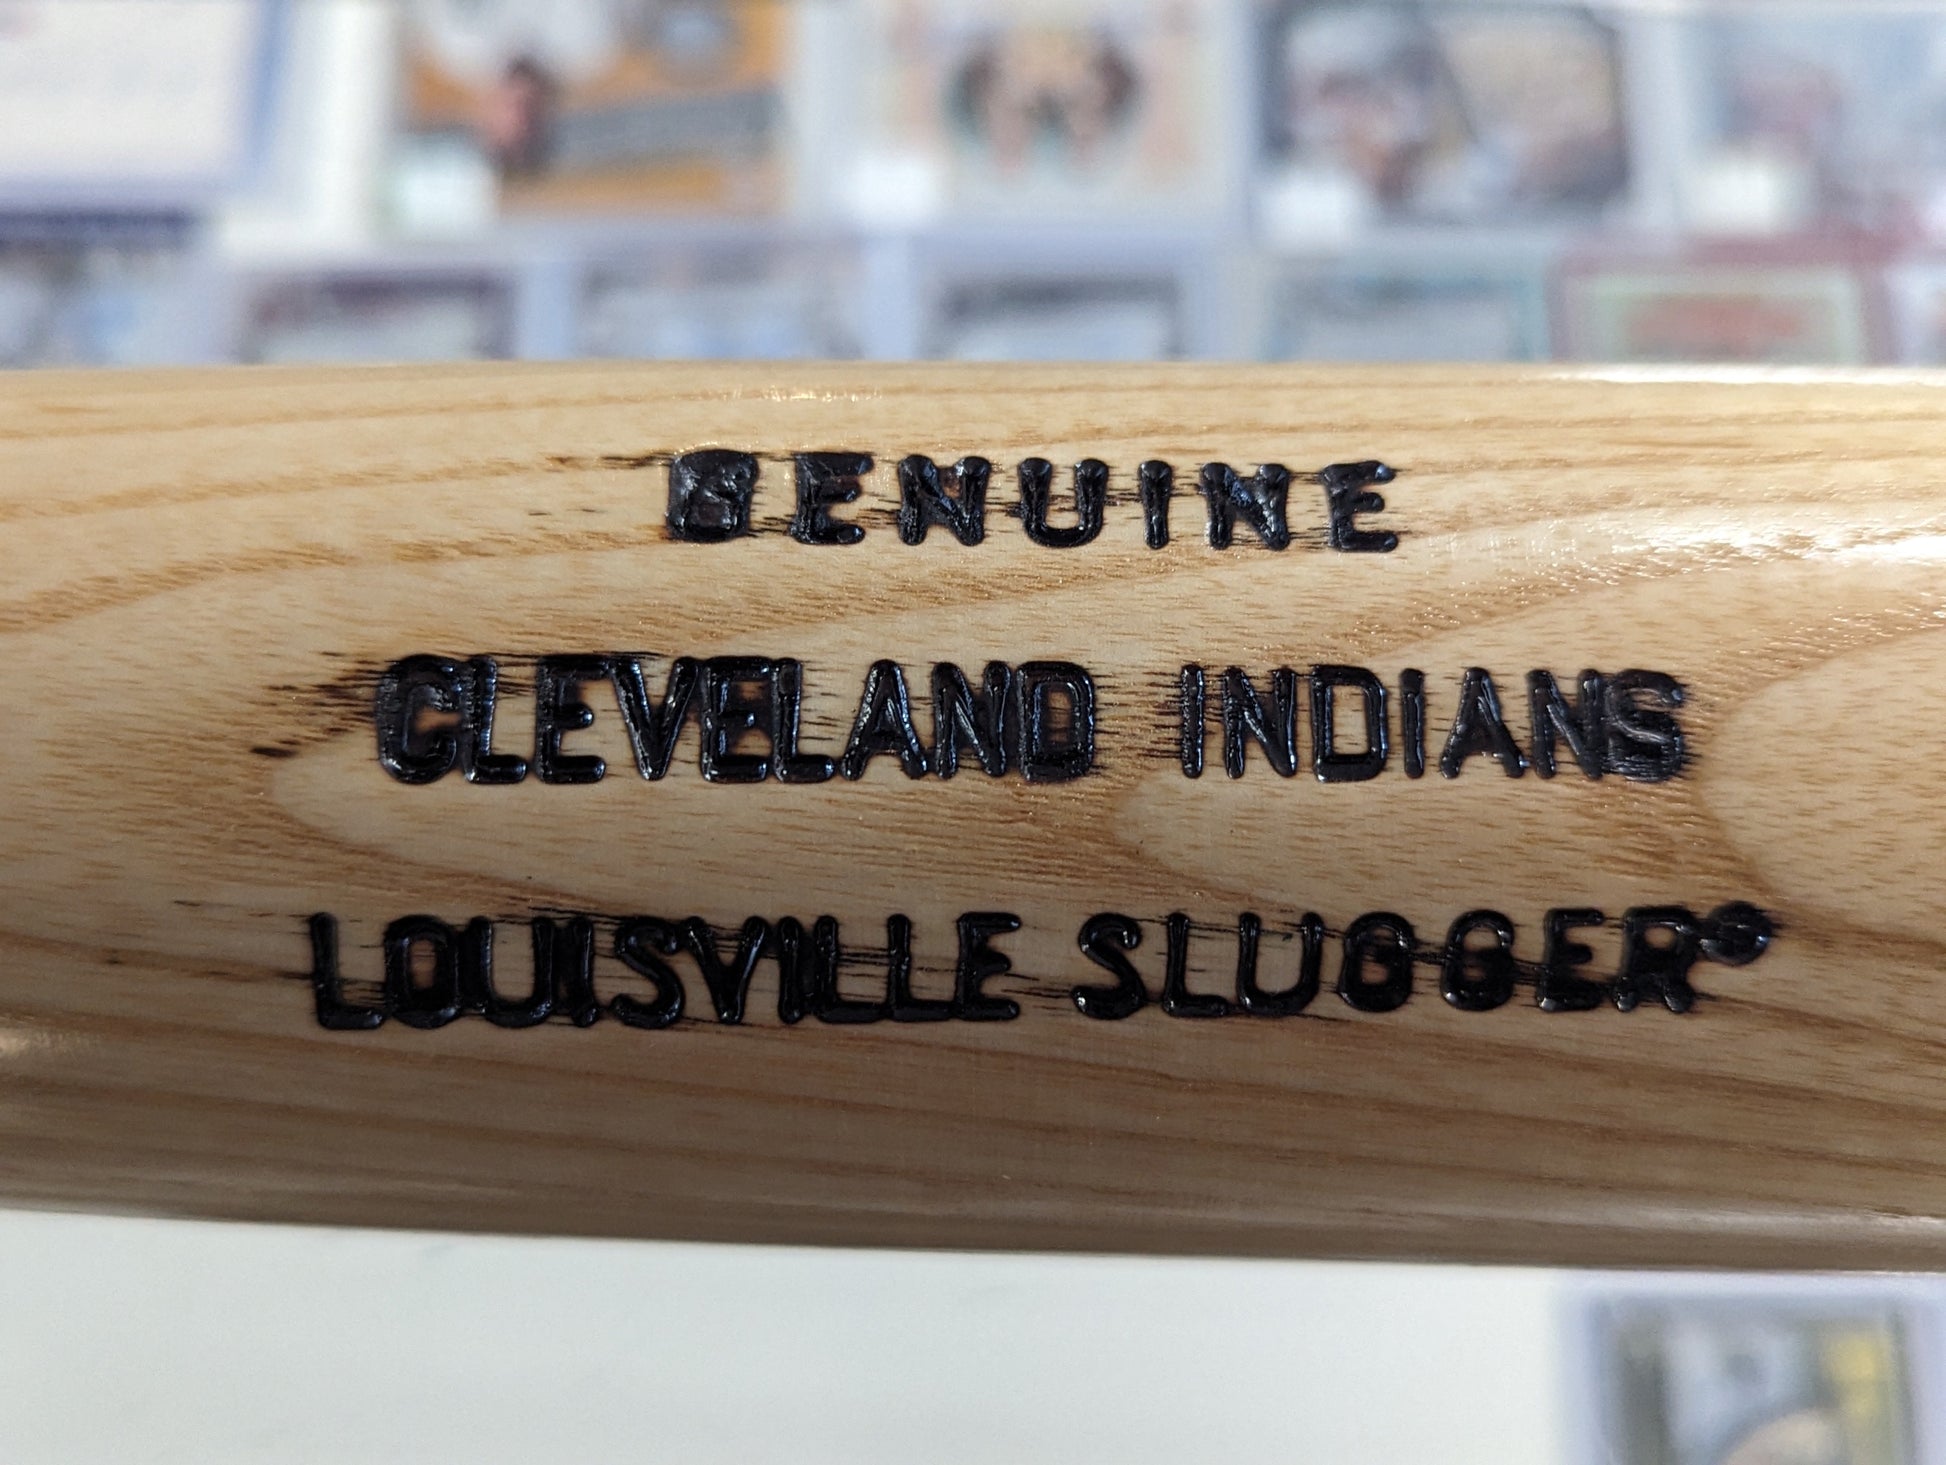 Aaron Boone Signed Louisville Slugger Baseball Bat - Covert Comics and Collectibles